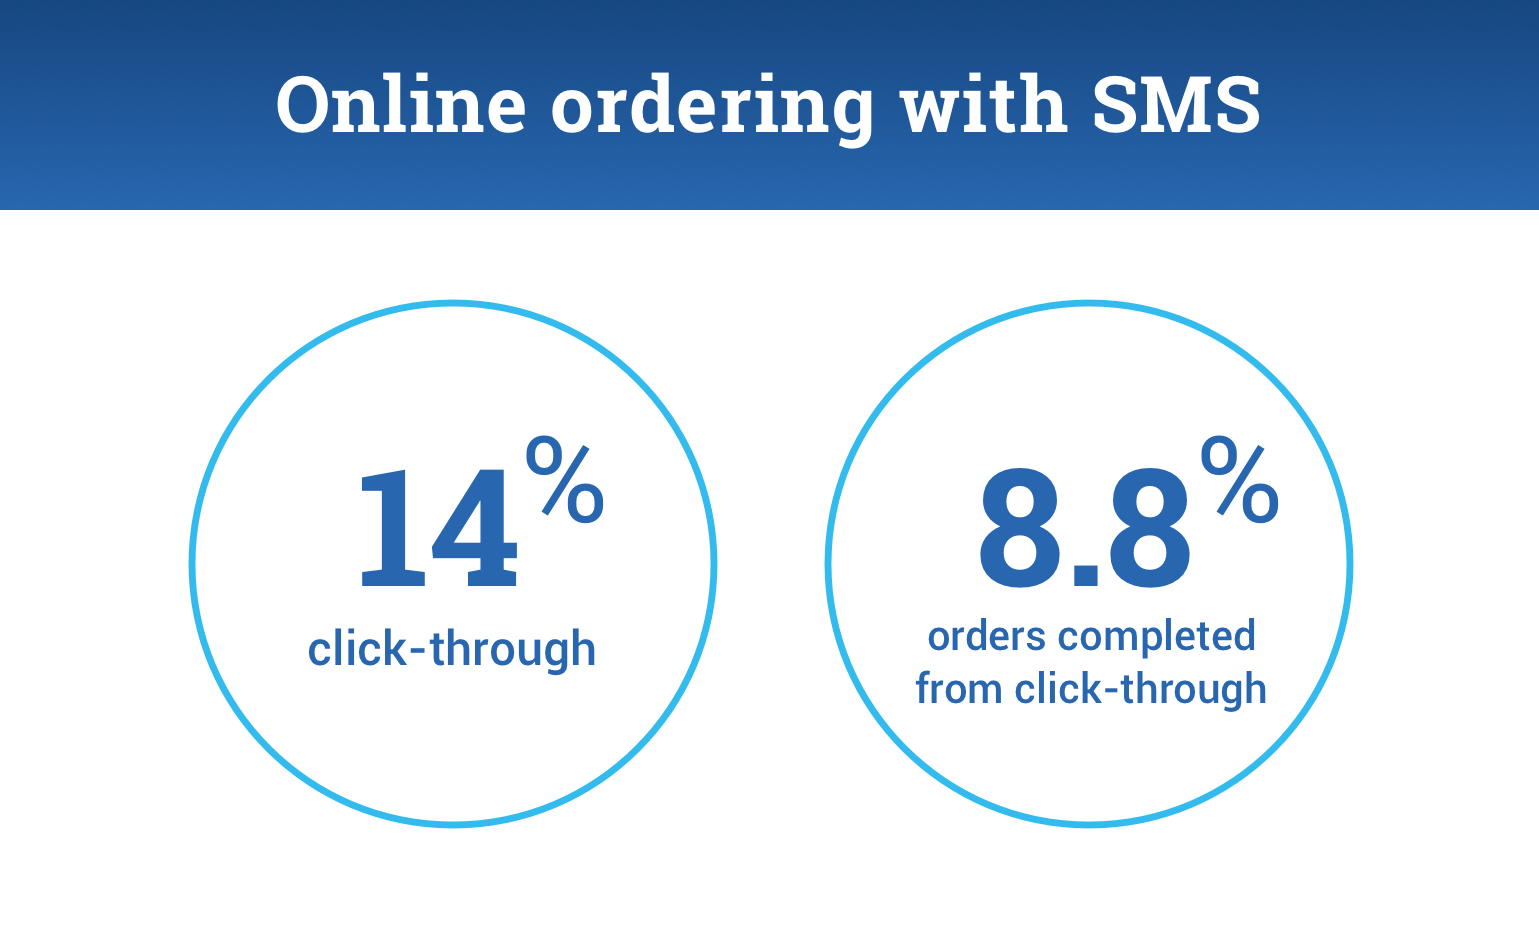 An infographic shwing the results for online ordering with SMS:

14% click-through.
8.8% ordered completed from click-through.